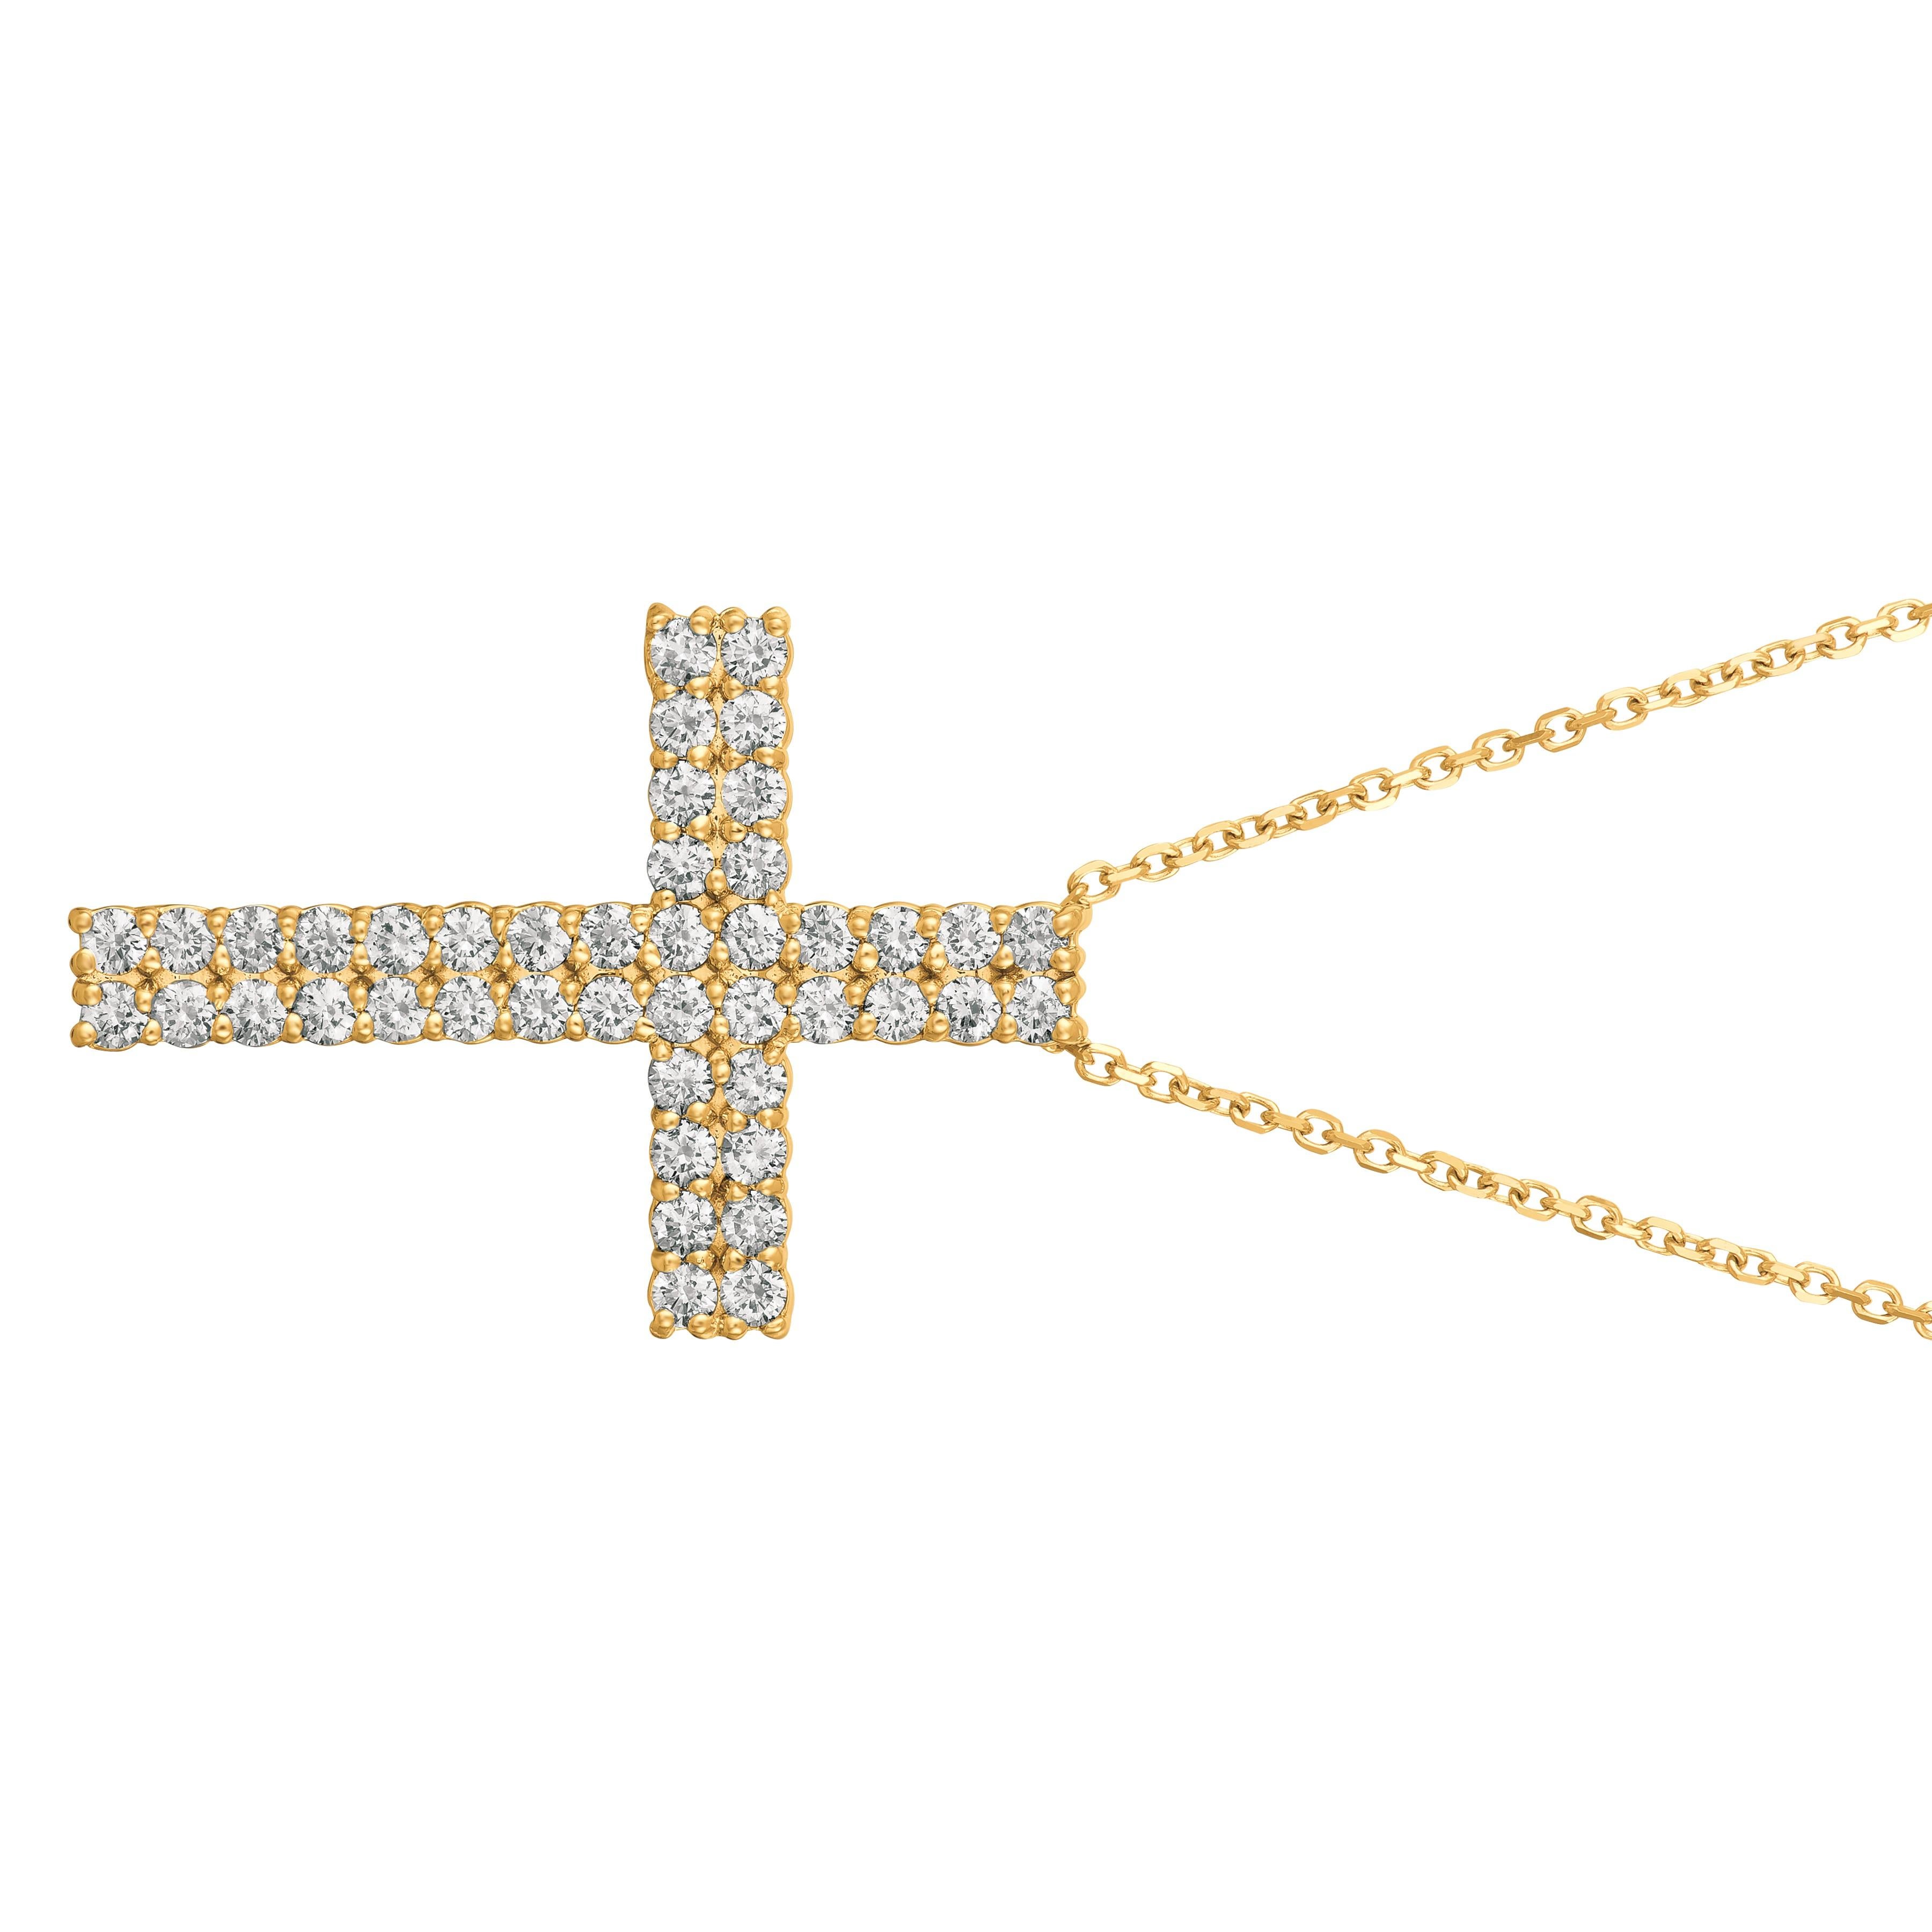 1.75 Carat Natural Diamond Cross Pendant Necklace 14K Yellow Gold G SI 18'' chain

100% Natural Diamonds, Not Enhanced in any way Round Cut Diamond Necklace
1.75CT
G-H
SI
14K Yellow Gold Pave style 5.8 gram
1 5/16 inch in height, 15/16 inch in